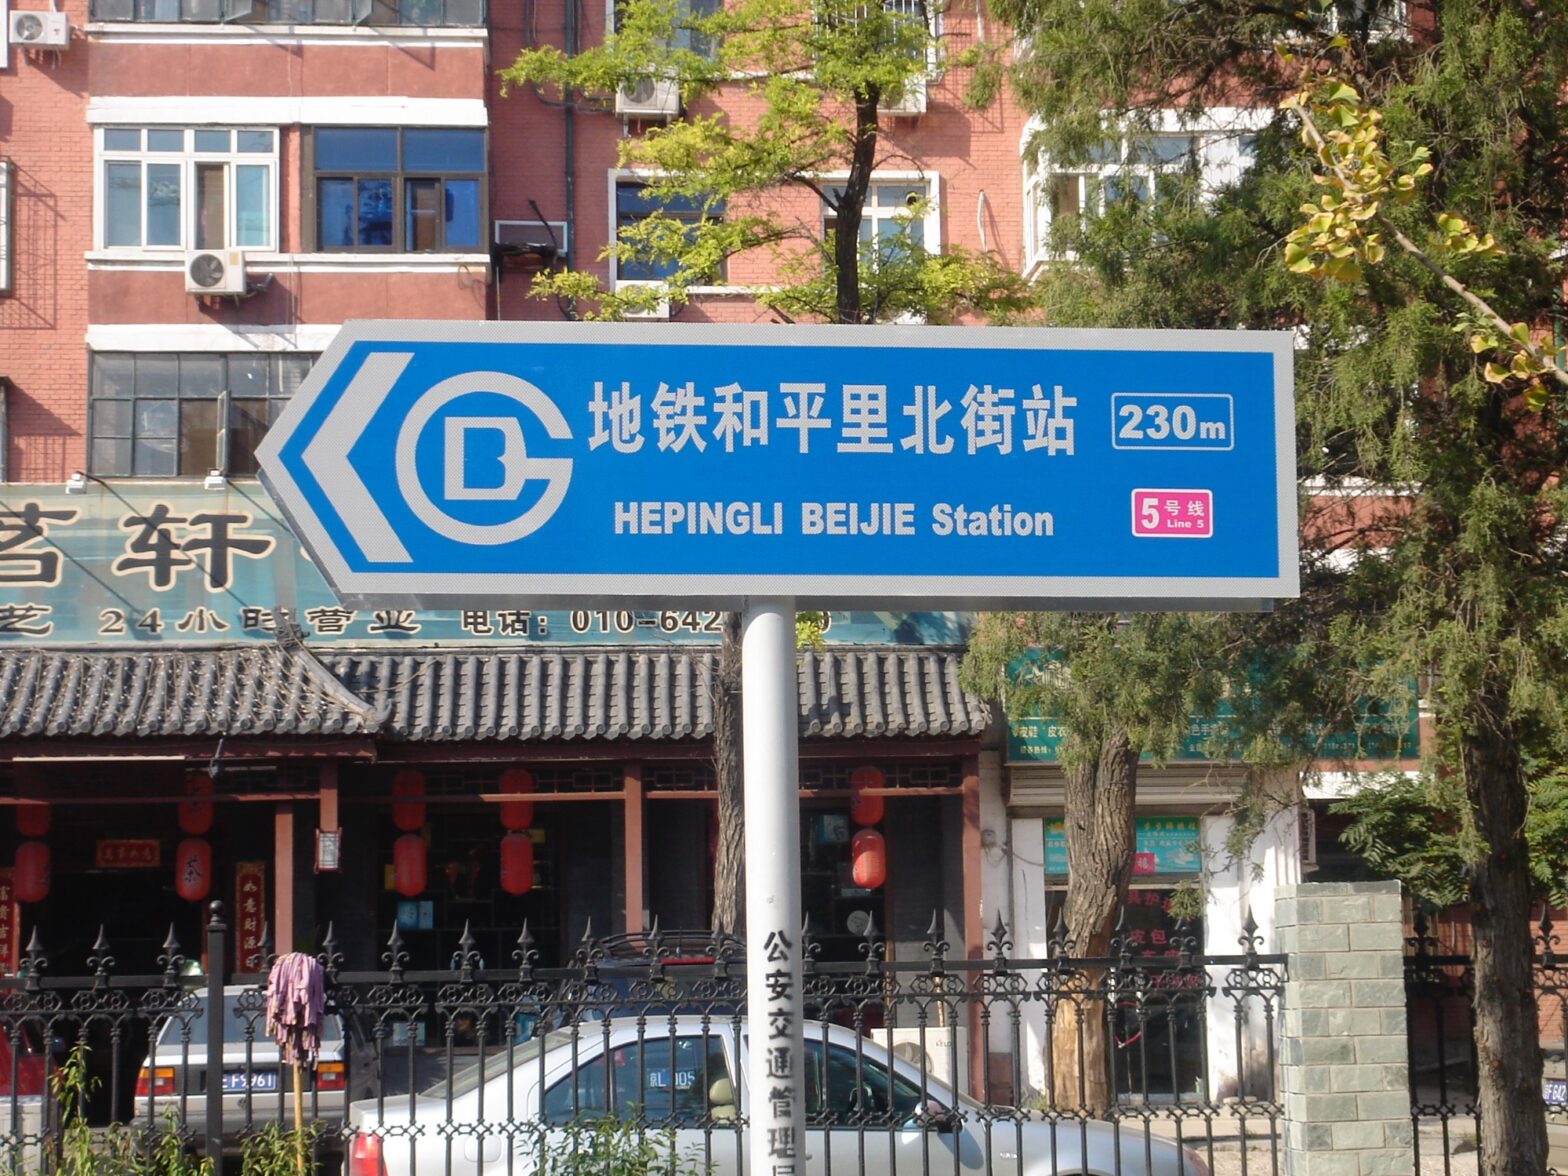 An image of a signpost to Beijing Subway Line 5